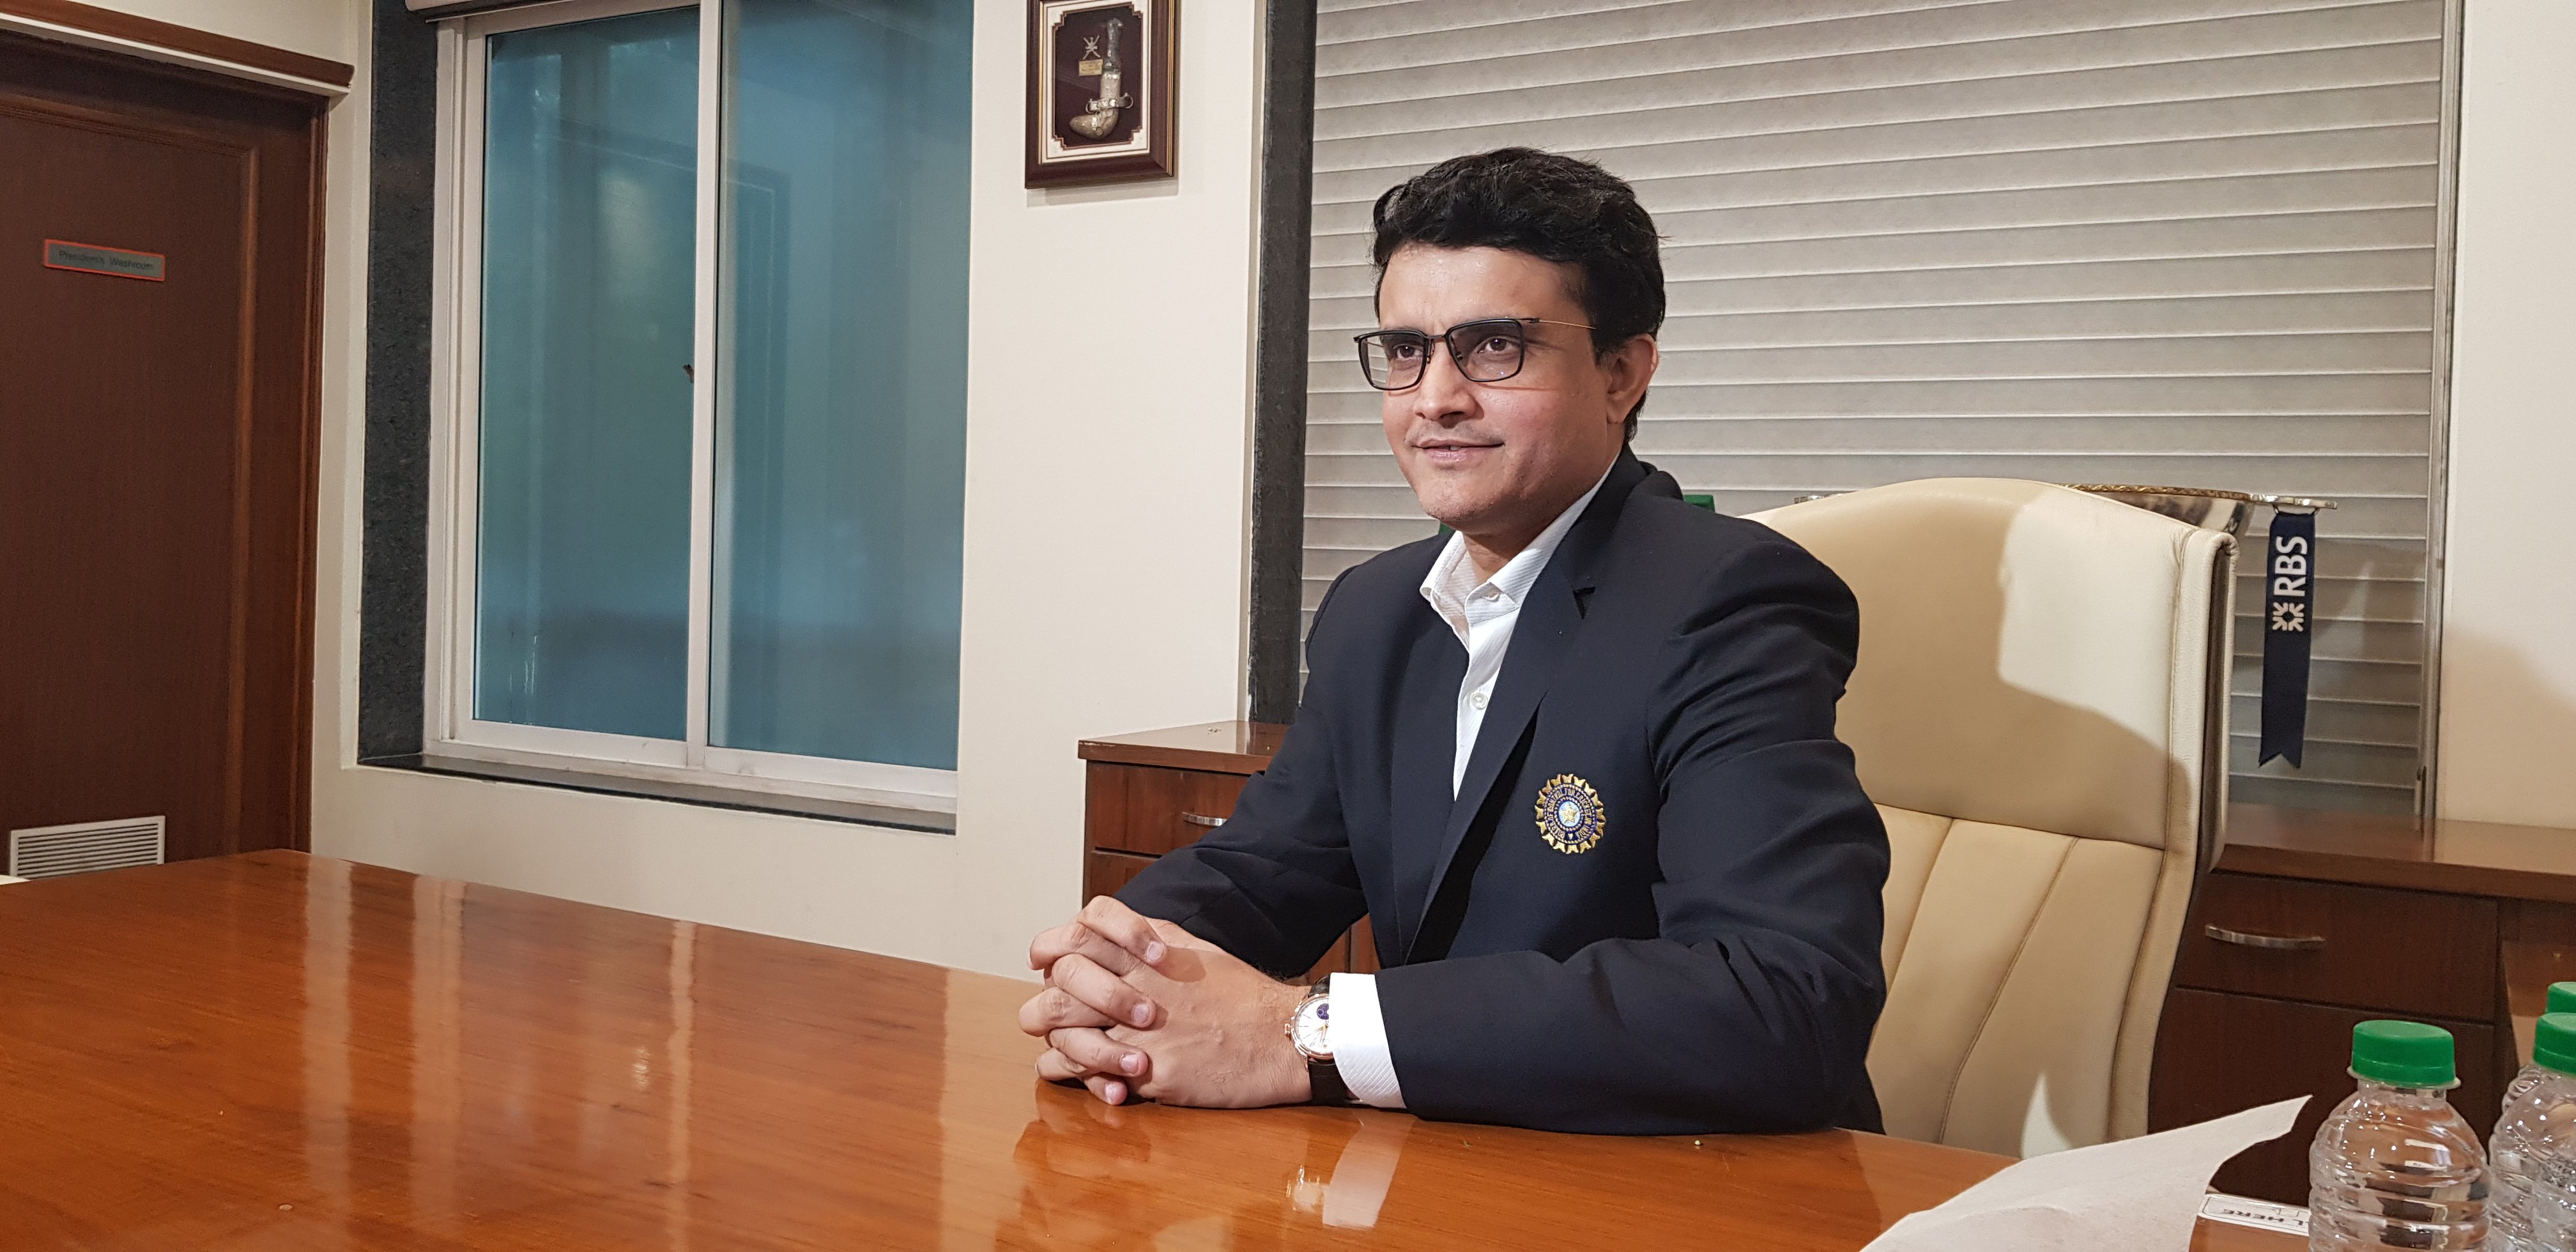 Lucknow to host women’s T20 challenger series, confirms Sourav Ganguly